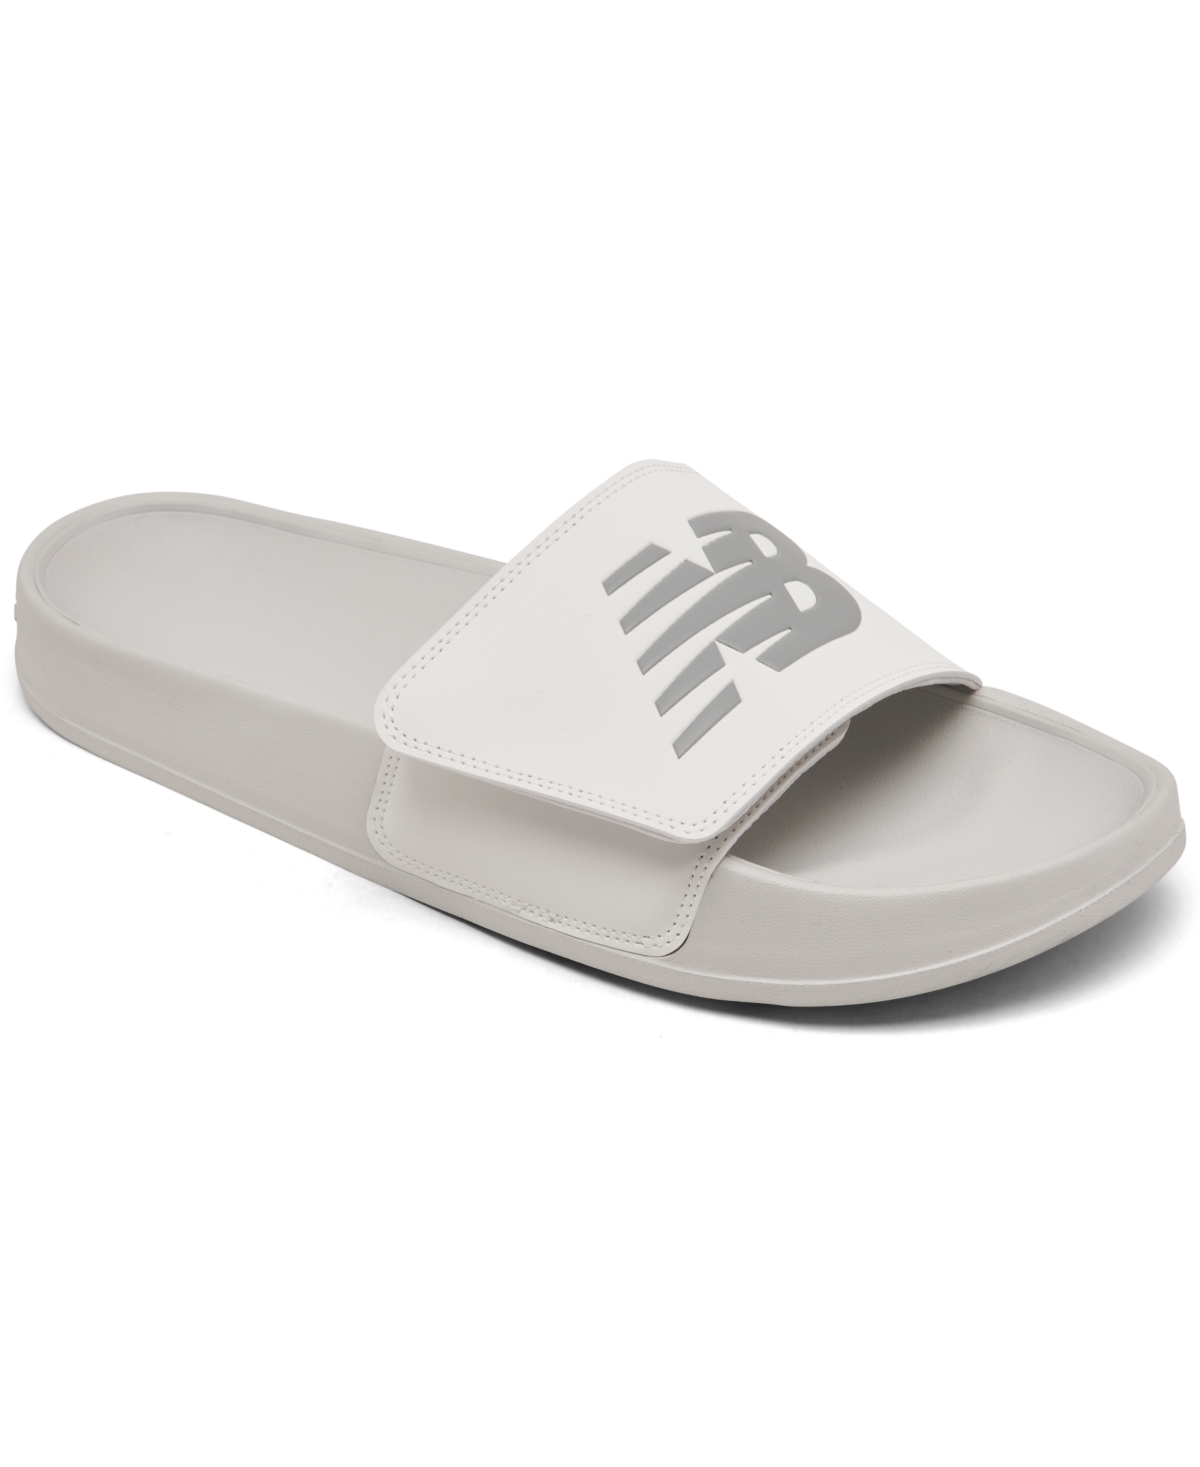 New Balance Men's 200 Adjustable Strap Sandals From Finish Line In White